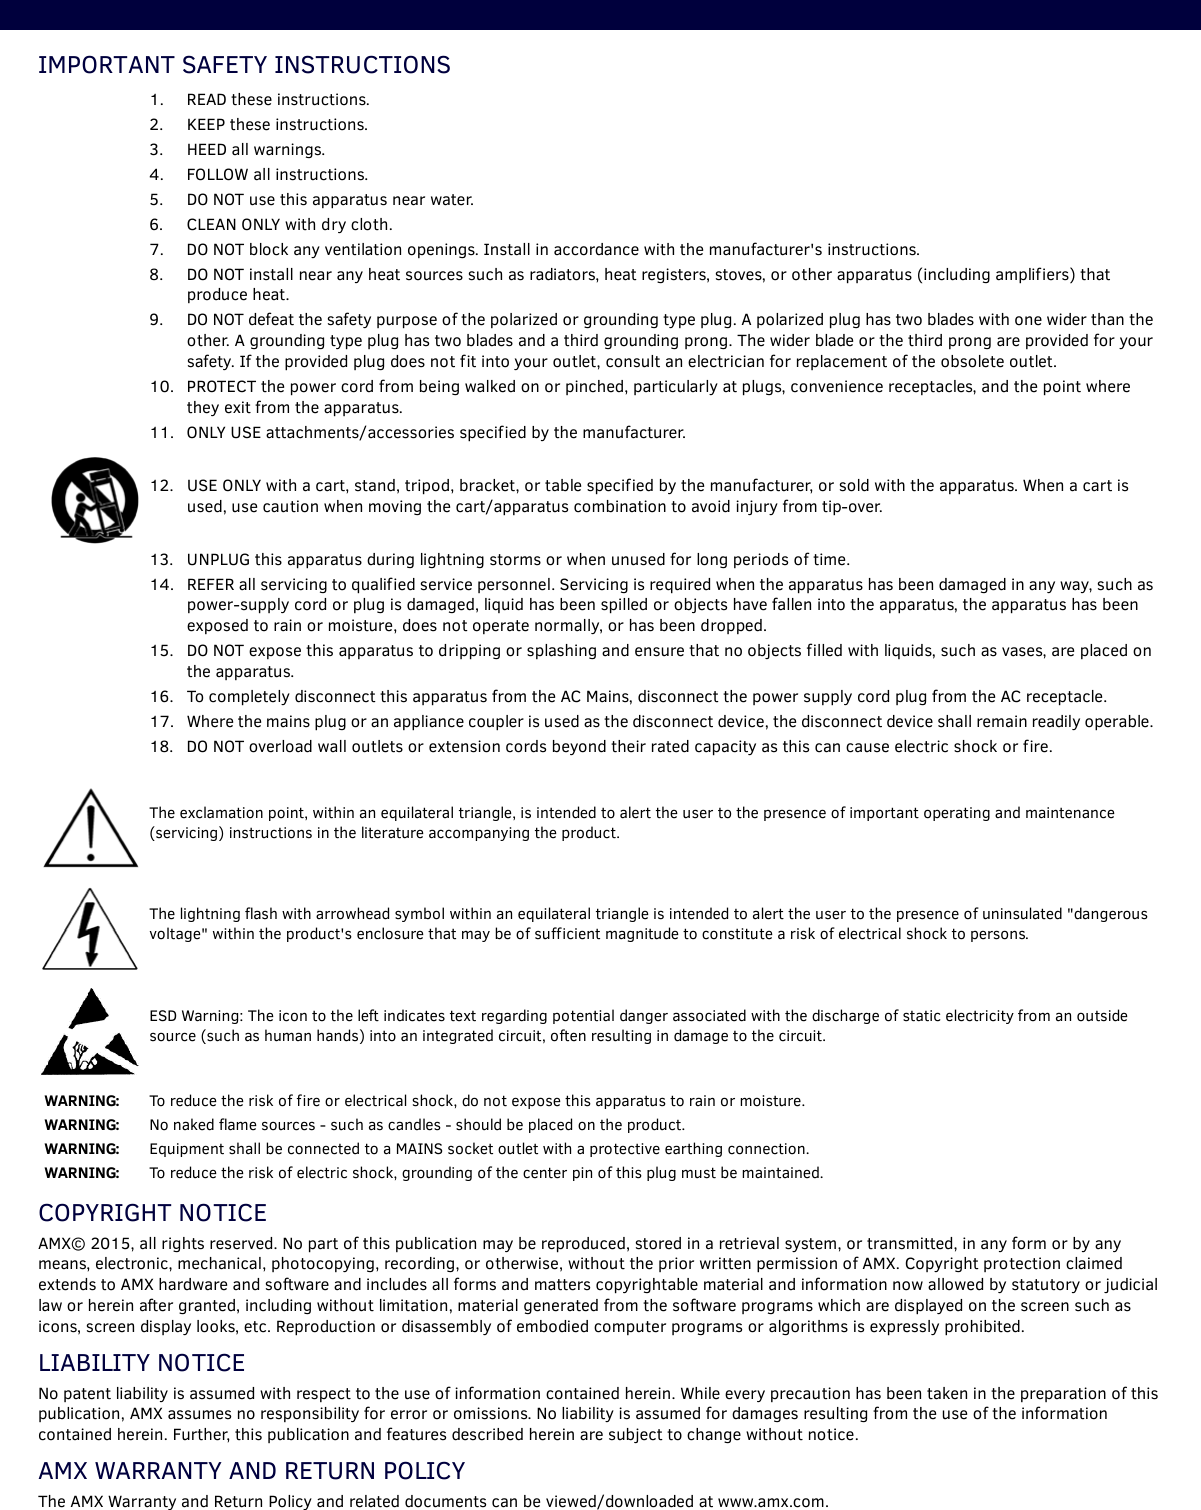 IMPORTANT SAFETY INSTRUCTIONS        COPYRIGHT NOTICEAMX© 2015, all rights reserved. No part of this publication may be reproduced, stored in a retrieval system, or transmitted, in any form or by any means, electronic, mechanical, photocopying, recording, or otherwise, without the prior written permission of AMX. Copyright protection claimed extends to AMX hardware and software and includes all forms and matters copyrightable material and information now allowed by statutory or judicial law or herein after granted, including without limitation, material generated from the software programs which are displayed on the screen such as icons, screen display looks, etc. Reproduction or disassembly of embodied computer programs or algorithms is expressly prohibited.LIABILITY NOTICENo patent liability is assumed with respect to the use of information contained herein. While every precaution has been taken in the preparation of this publication, AMX assumes no responsibility for error or omissions. No liability is assumed for damages resulting from the use of the information contained herein. Further, this publication and features described herein are subject to change without notice.AMX WARRANTY AND RETURN POLICYThe AMX Warranty and Return Policy and related documents can be viewed/downloaded at www.amx.com.1. READ these instructions.2. KEEP these instructions.3. HEED all warnings.4. FOLLOW all instructions.5. DO NOT use this apparatus near water.6. CLEAN ONLY with dry cloth.7. DO NOT block any ventilation openings. Install in accordance with the manufacturer&apos;s instructions.8. DO NOT install near any heat sources such as radiators, heat registers, stoves, or other apparatus (including amplifiers) that produce heat.9. DO NOT defeat the safety purpose of the polarized or grounding type plug. A polarized plug has two blades with one wider than the other. A grounding type plug has two blades and a third grounding prong. The wider blade or the third prong are provided for your safety. If the provided plug does not fit into your outlet, consult an electrician for replacement of the obsolete outlet.10. PROTECT the power cord from being walked on or pinched, particularly at plugs, convenience receptacles, and the point where they exit from the apparatus.11. ONLY USE attachments/accessories specified by the manufacturer.12. USE ONLY with a cart, stand, tripod, bracket, or table specified by the manufacturer, or sold with the apparatus. When a cart is used, use caution when moving the cart/apparatus combination to avoid injury from tip-over.13. UNPLUG this apparatus during lightning storms or when unused for long periods of time.14. REFER all servicing to qualified service personnel. Servicing is required when the apparatus has been damaged in any way, such as power-supply cord or plug is damaged, liquid has been spilled or objects have fallen into the apparatus, the apparatus has been exposed to rain or moisture, does not operate normally, or has been dropped.15. DO NOT expose this apparatus to dripping or splashing and ensure that no objects filled with liquids, such as vases, are placed on the apparatus.16. To completely disconnect this apparatus from the AC Mains, disconnect the power supply cord plug from the AC receptacle.17. Where the mains plug or an appliance coupler is used as the disconnect device, the disconnect device shall remain readily operable. 18. DO NOT overload wall outlets or extension cords beyond their rated capacity as this can cause electric shock or fire. The exclamation point, within an equilateral triangle, is intended to alert the user to the presence of important operating and maintenance (servicing) instructions in the literature accompanying the product.The lightning flash with arrowhead symbol within an equilateral triangle is intended to alert the user to the presence of uninsulated &quot;dangerous voltage&quot; within the product&apos;s enclosure that may be of sufficient magnitude to constitute a risk of electrical shock to persons.ESD Warning: The icon to the left indicates text regarding potential danger associated with the discharge of static electricity from an outside source (such as human hands) into an integrated circuit, often resulting in damage to the circuit.WARNING:  To reduce the risk of fire or electrical shock, do not expose this apparatus to rain or moisture.WARNING:  No naked flame sources - such as candles - should be placed on the product.WARNING:  Equipment shall be connected to a MAINS socket outlet with a protective earthing connection.WARNING:  To reduce the risk of electric shock, grounding of the center pin of this plug must be maintained. 